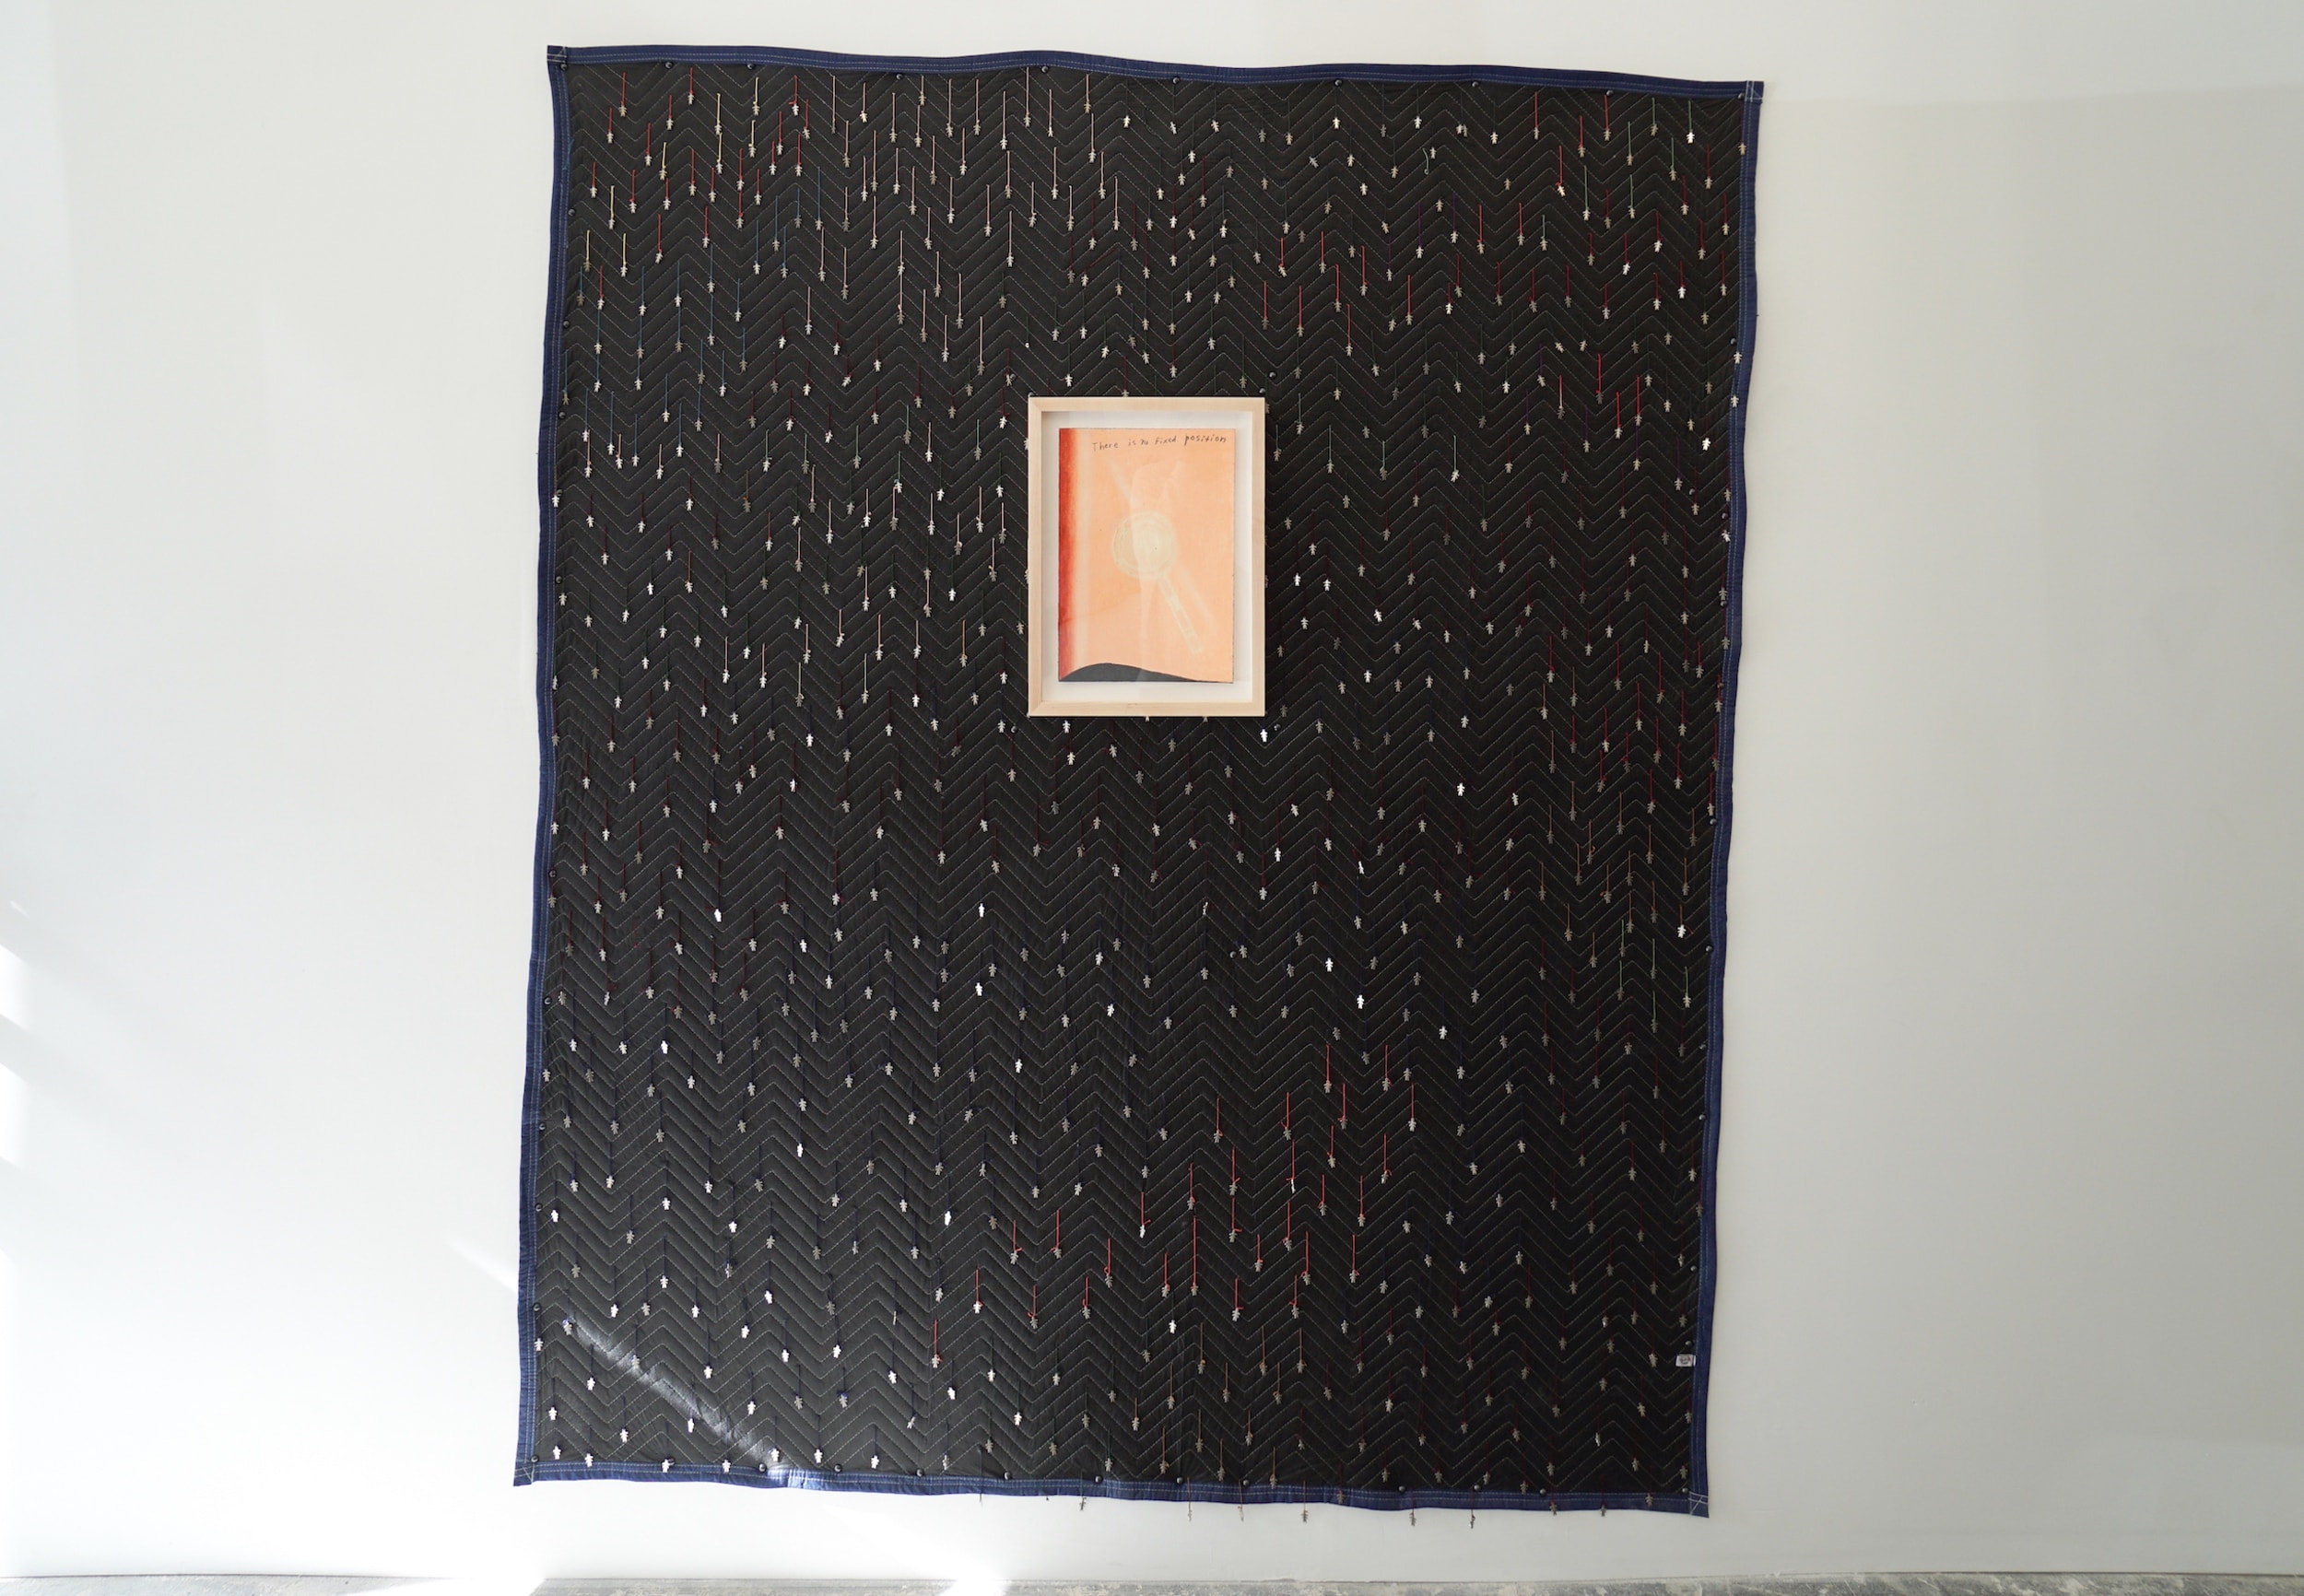  Morgan Ritter  There is no fixed position (on Protection Blanket) , 2017-2018 Oil stick on paper framed in maple on moving blanket, pigtail girl charms,  upholstery nails, silk, alpaca, acrylic thread, and “Somebody cares” tag 82.25 x 71.75 x 2 inch